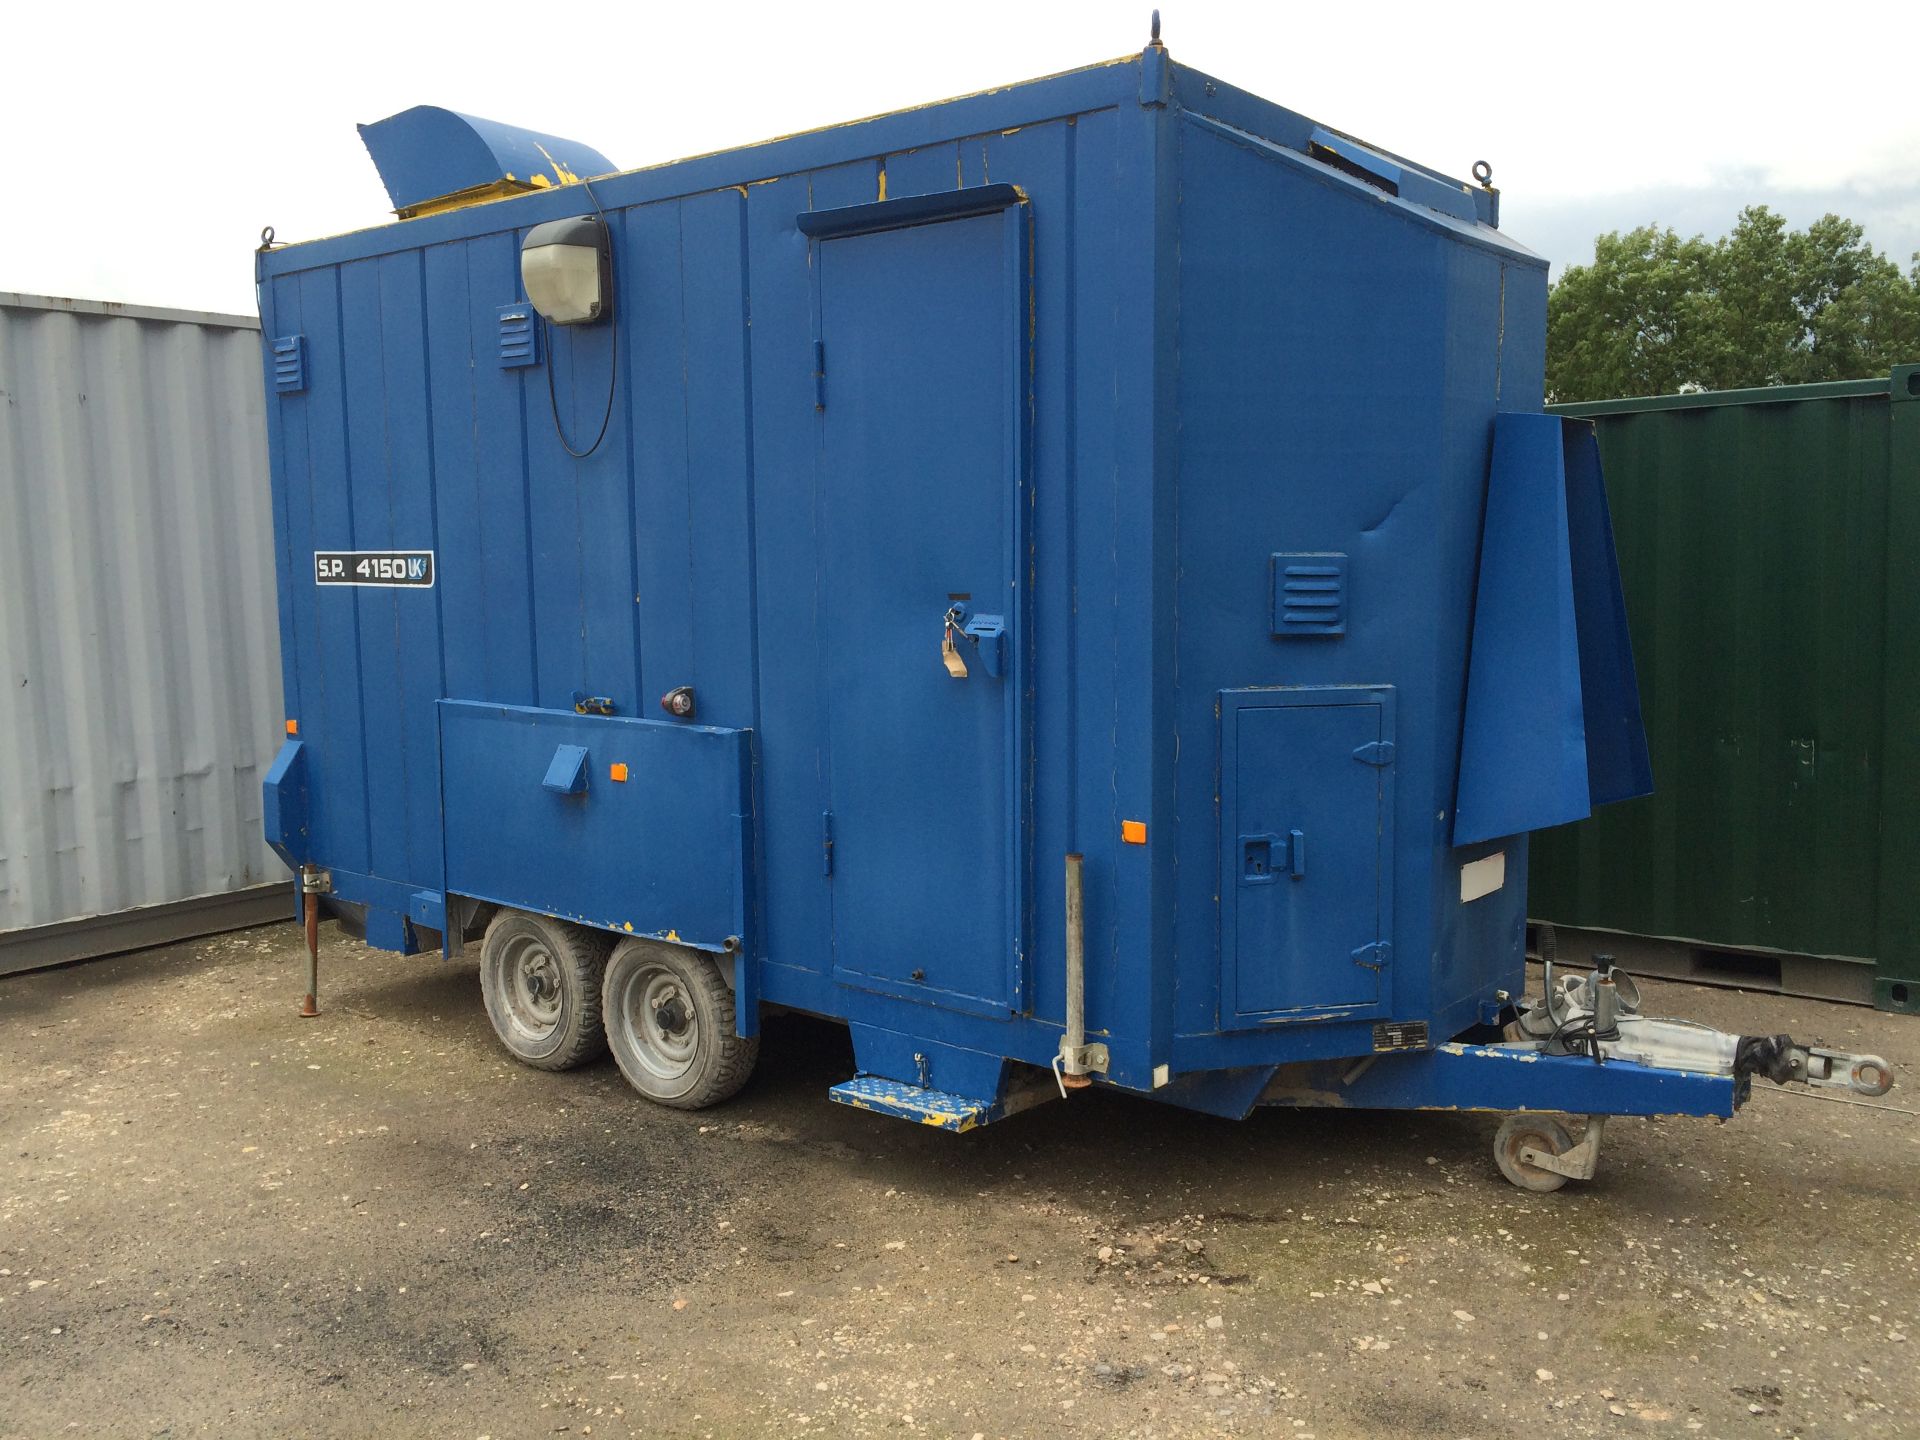 Securi-Cabin Towable Welfare Unit, with toilet, sink and seating, year of manufacture 2003 (plant